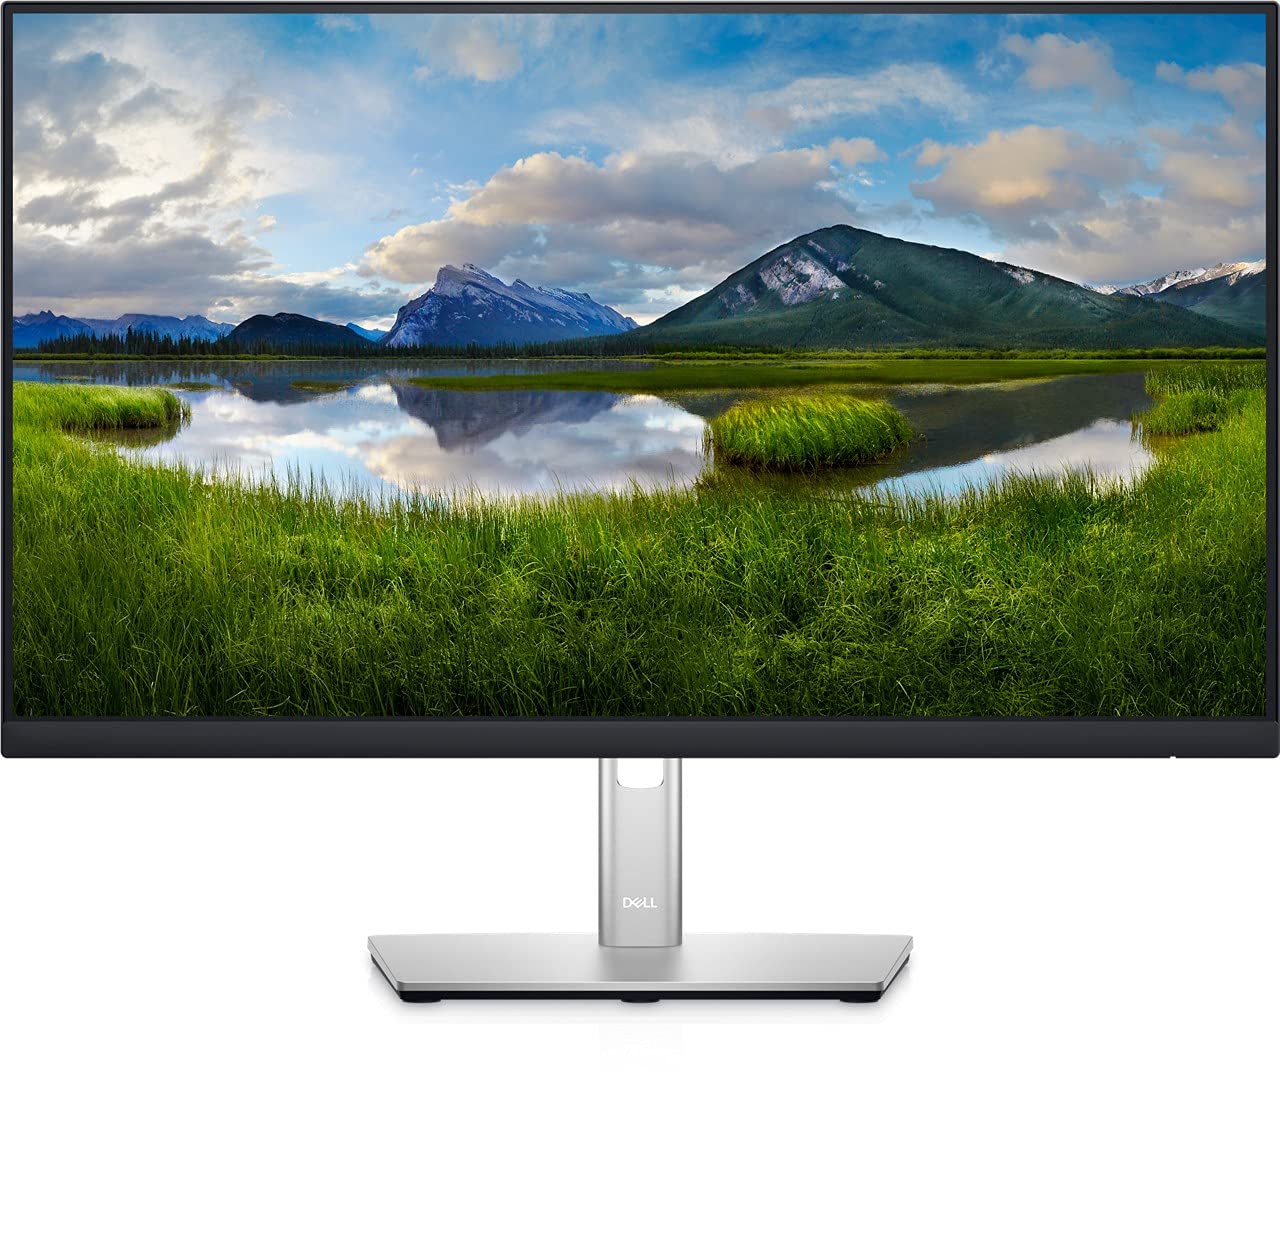 Dell 24 Monitor - P2422HE - Full HD 1080p, IPS Technology, USB-C Hub Monitor with Comfortview Plus,Black